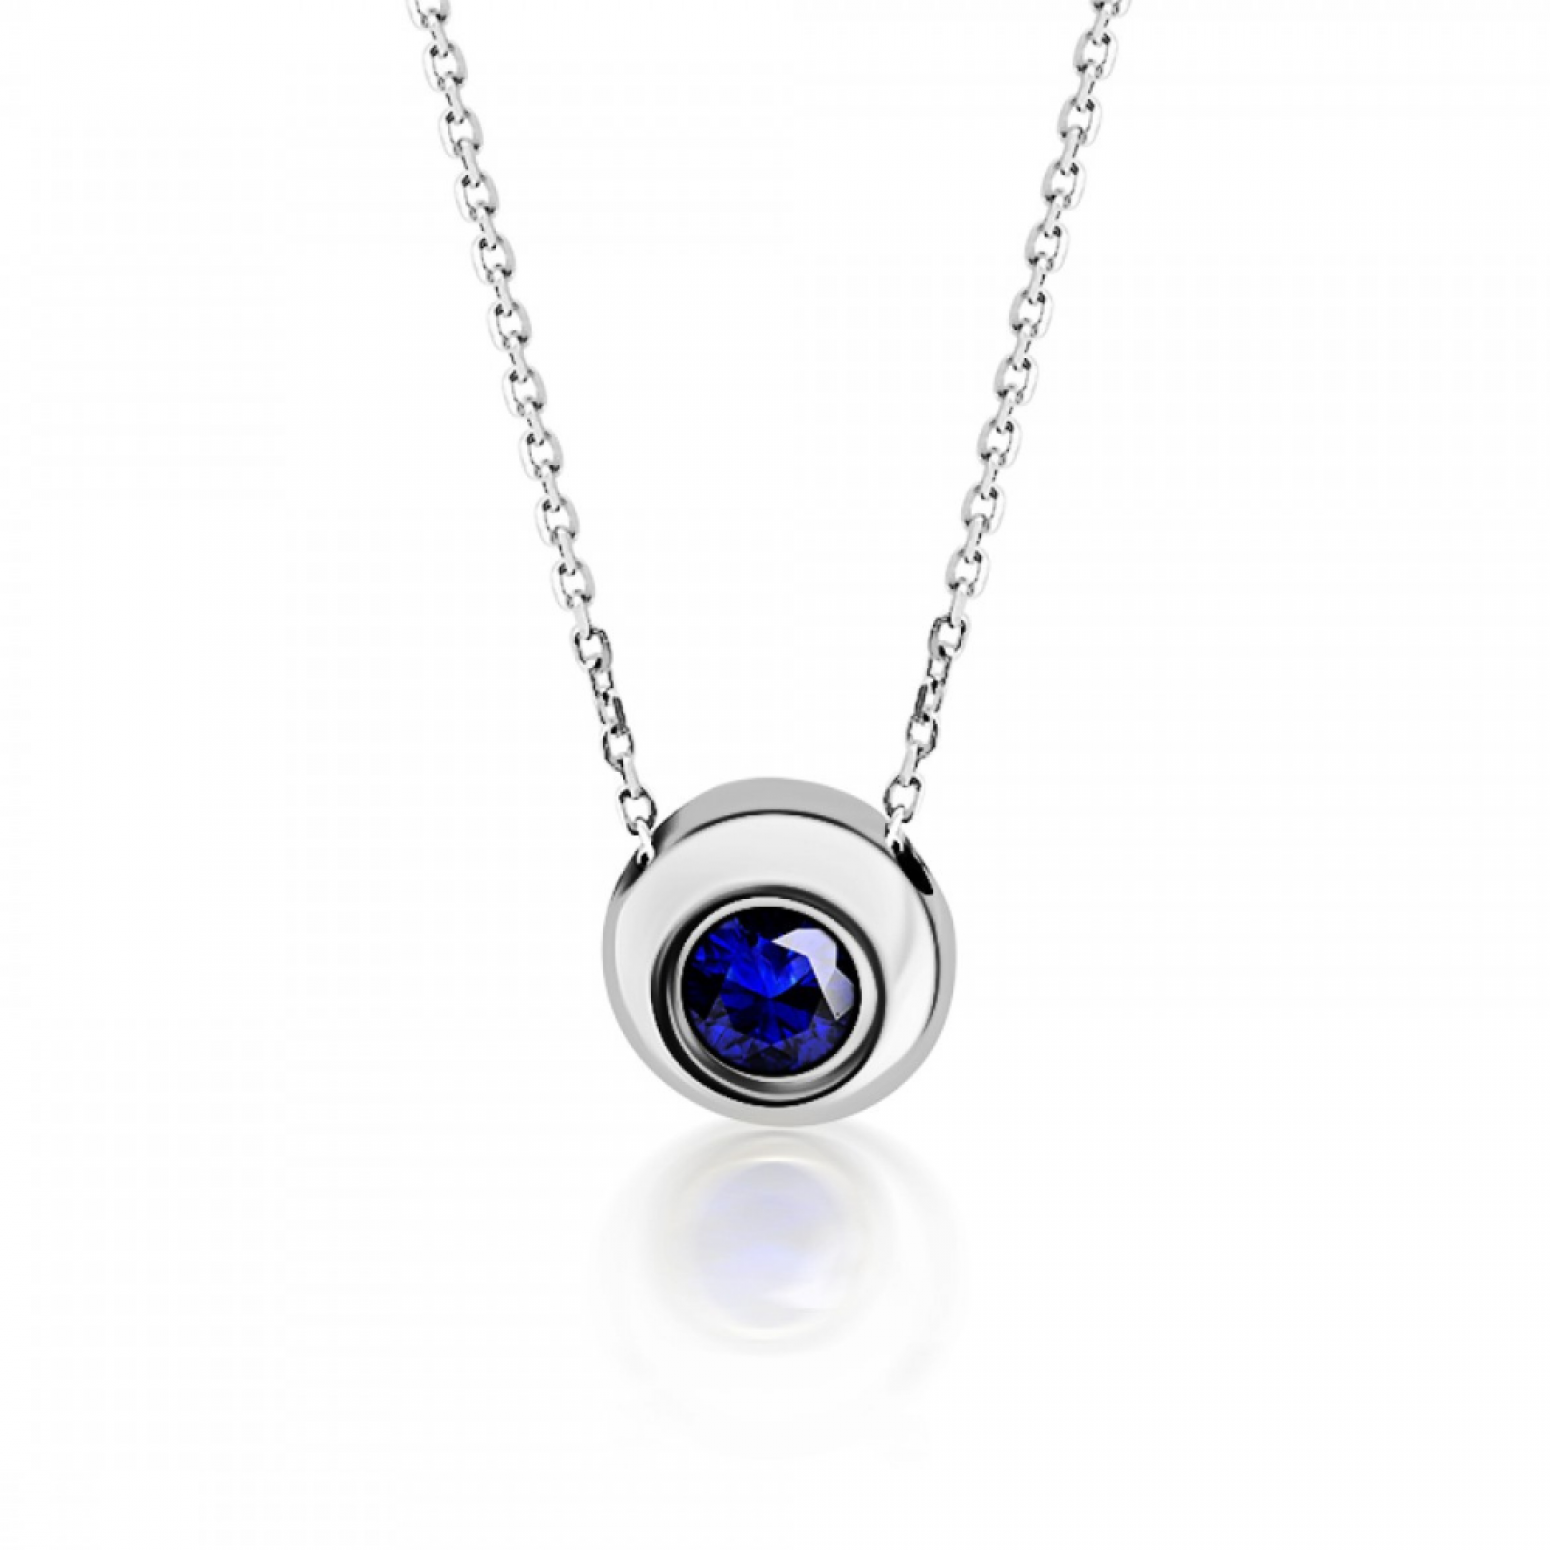 Solitaire necklace, K18 white gold with sapphire 0.15ct, ko5625 NECKLACES Κοσμηματα - chrilia.gr